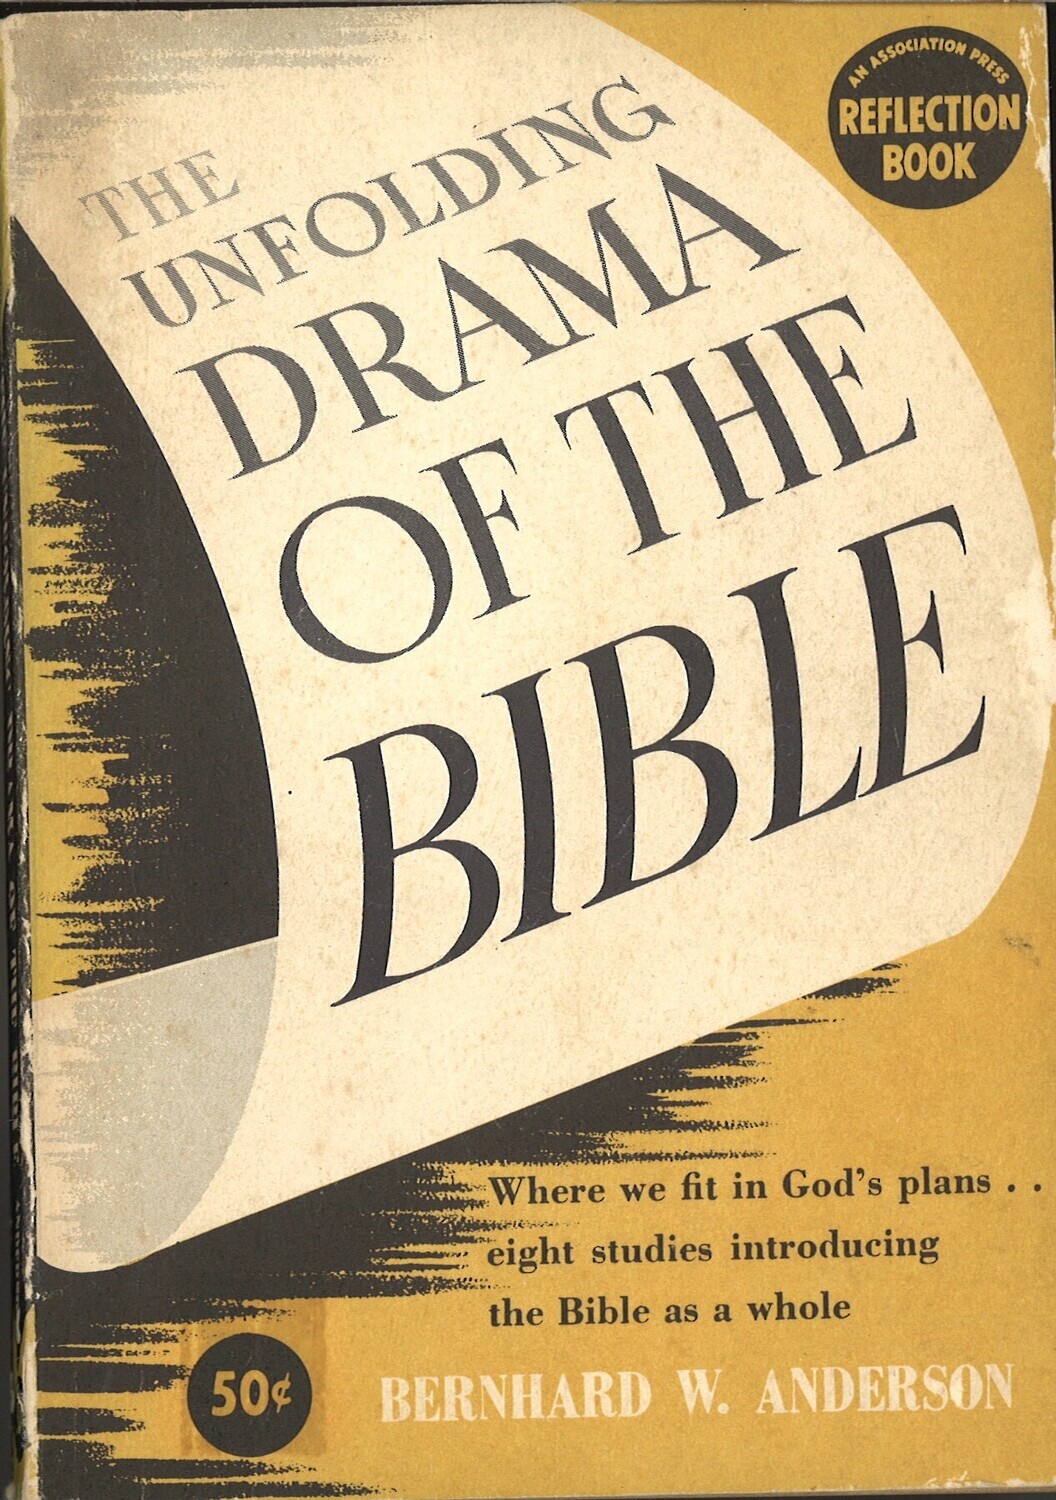 The Unfolding Drama of The Bible